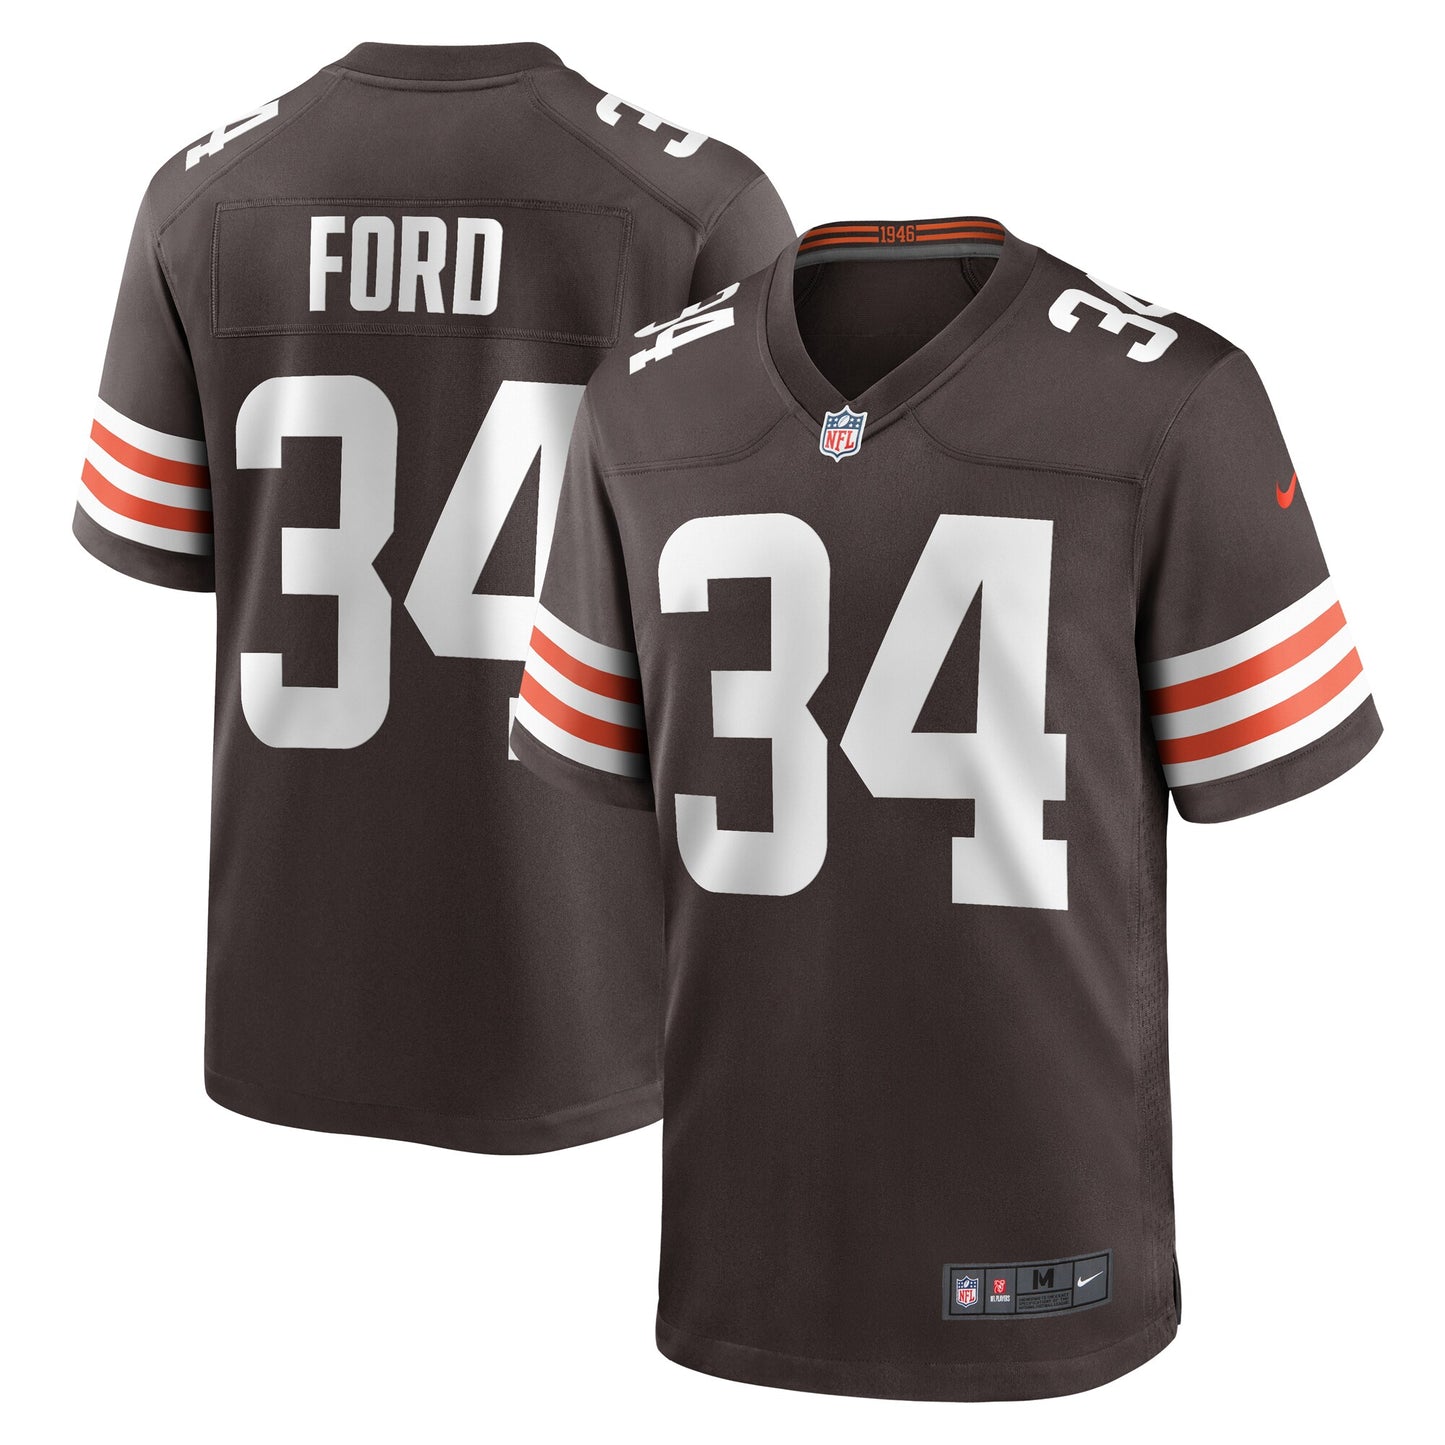 Jerome Ford Cleveland Browns Nike Game Player Jersey - Brown